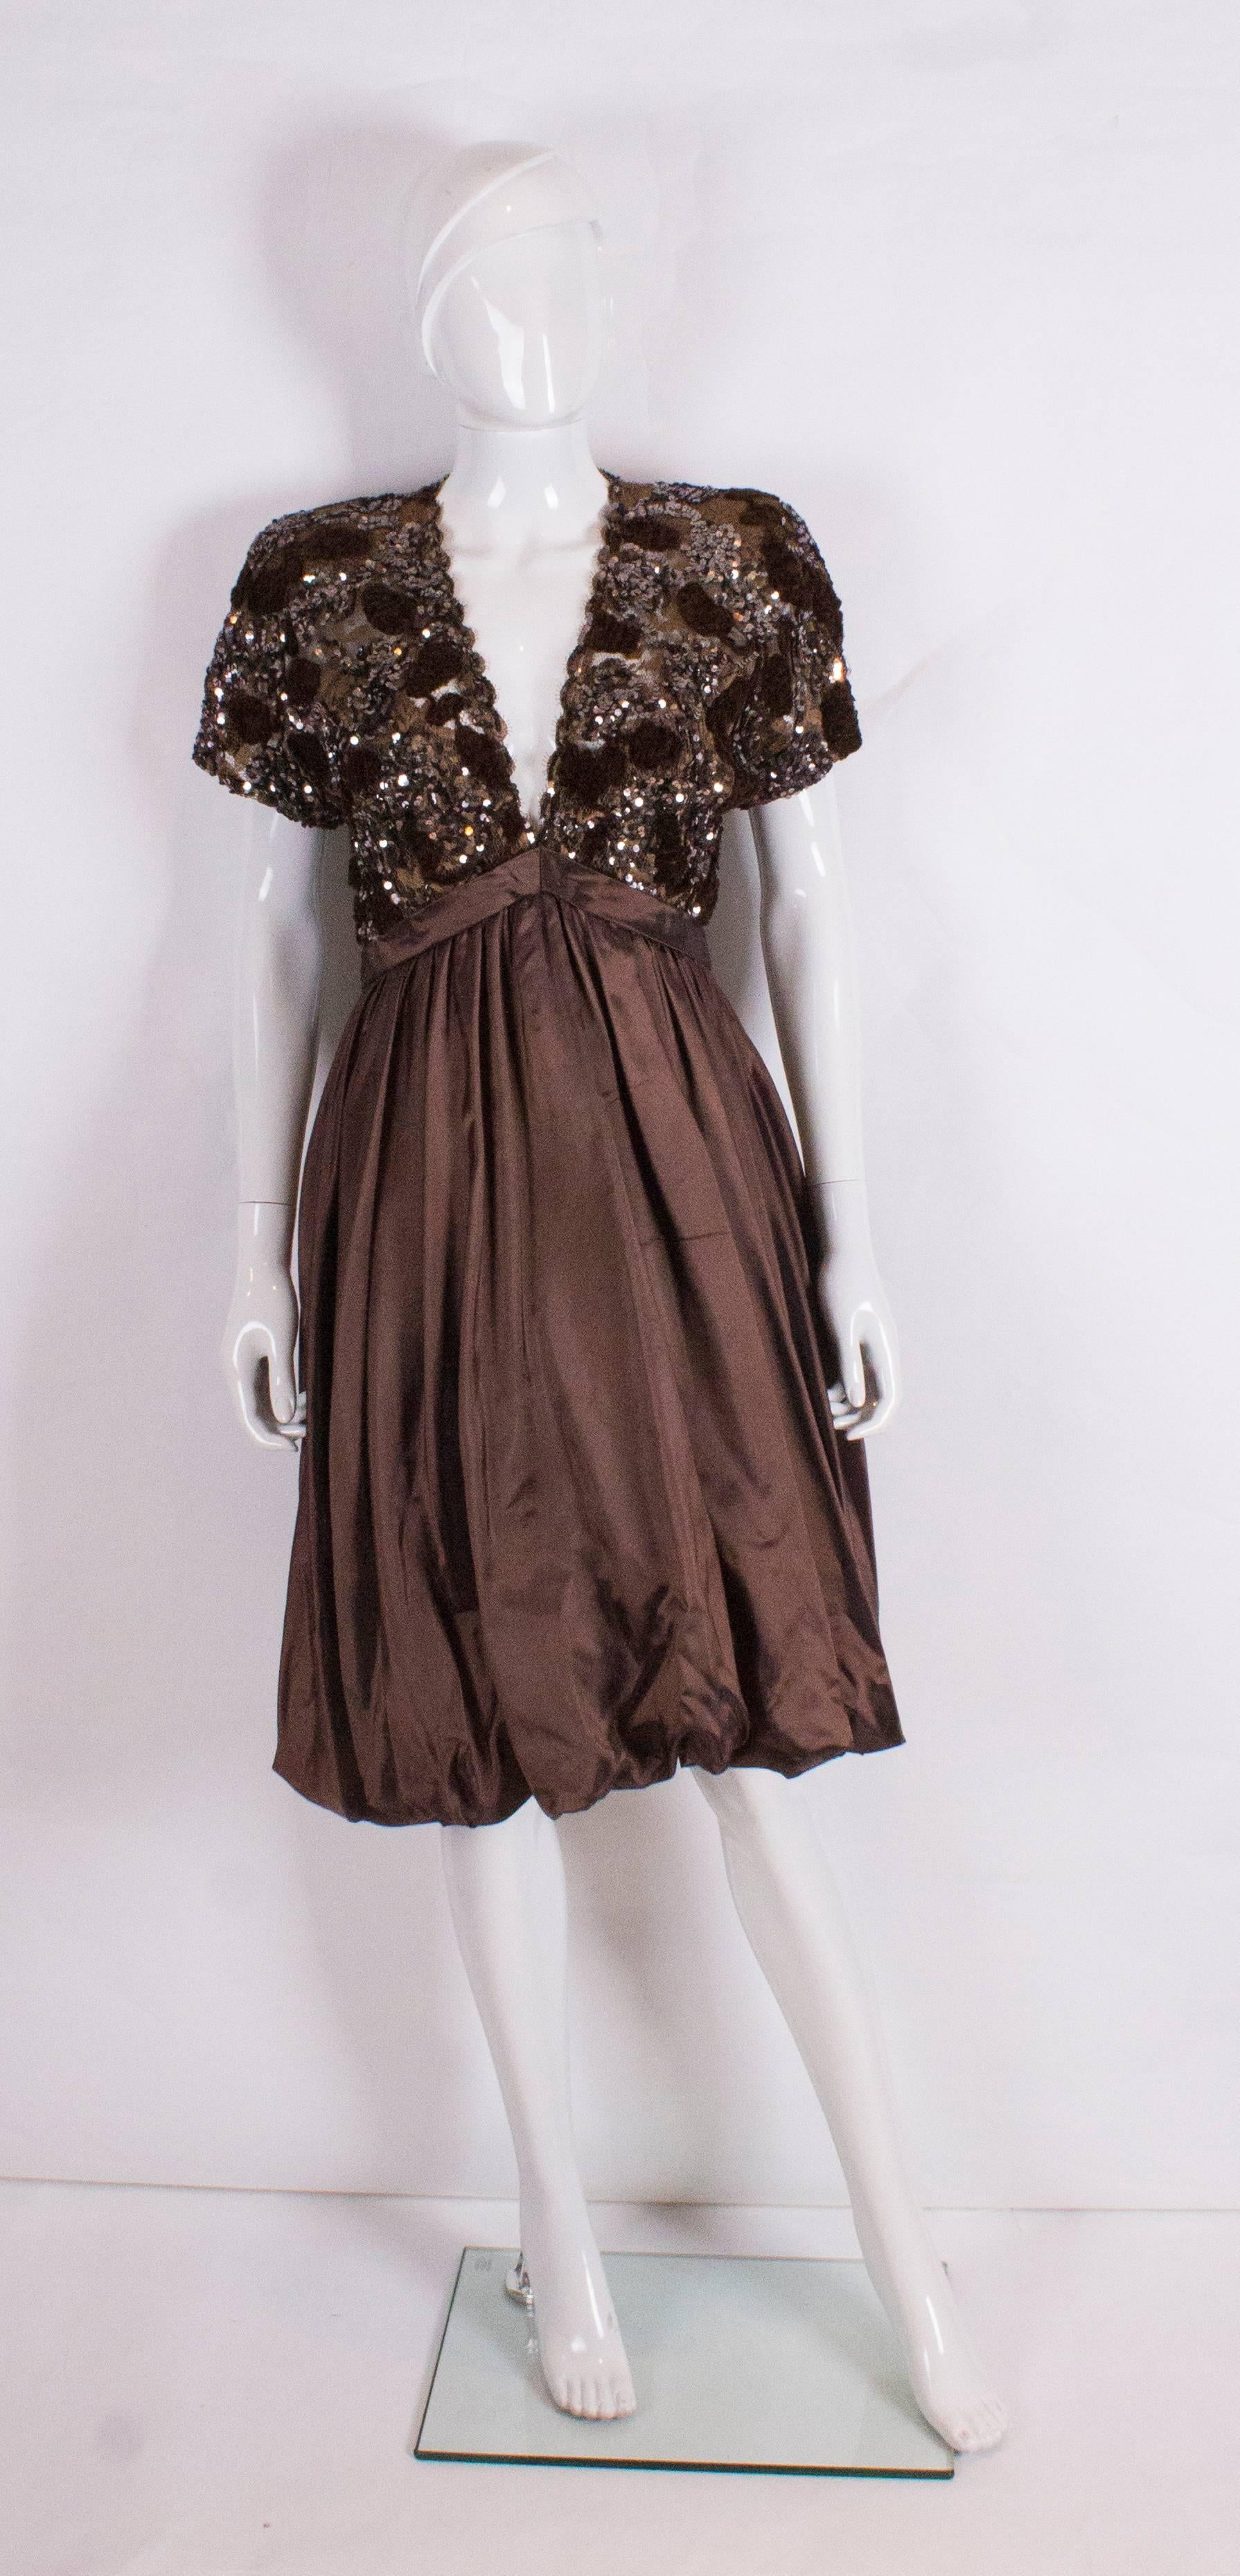 A great evening dress by Gicol. The dress has a brown sequin and lace upper body and silk skirt. It has a v neckline, ,cap sleeves ,central back zip and elastic at the back of the bubble hem enabling you to walk more easily. In addition there is a